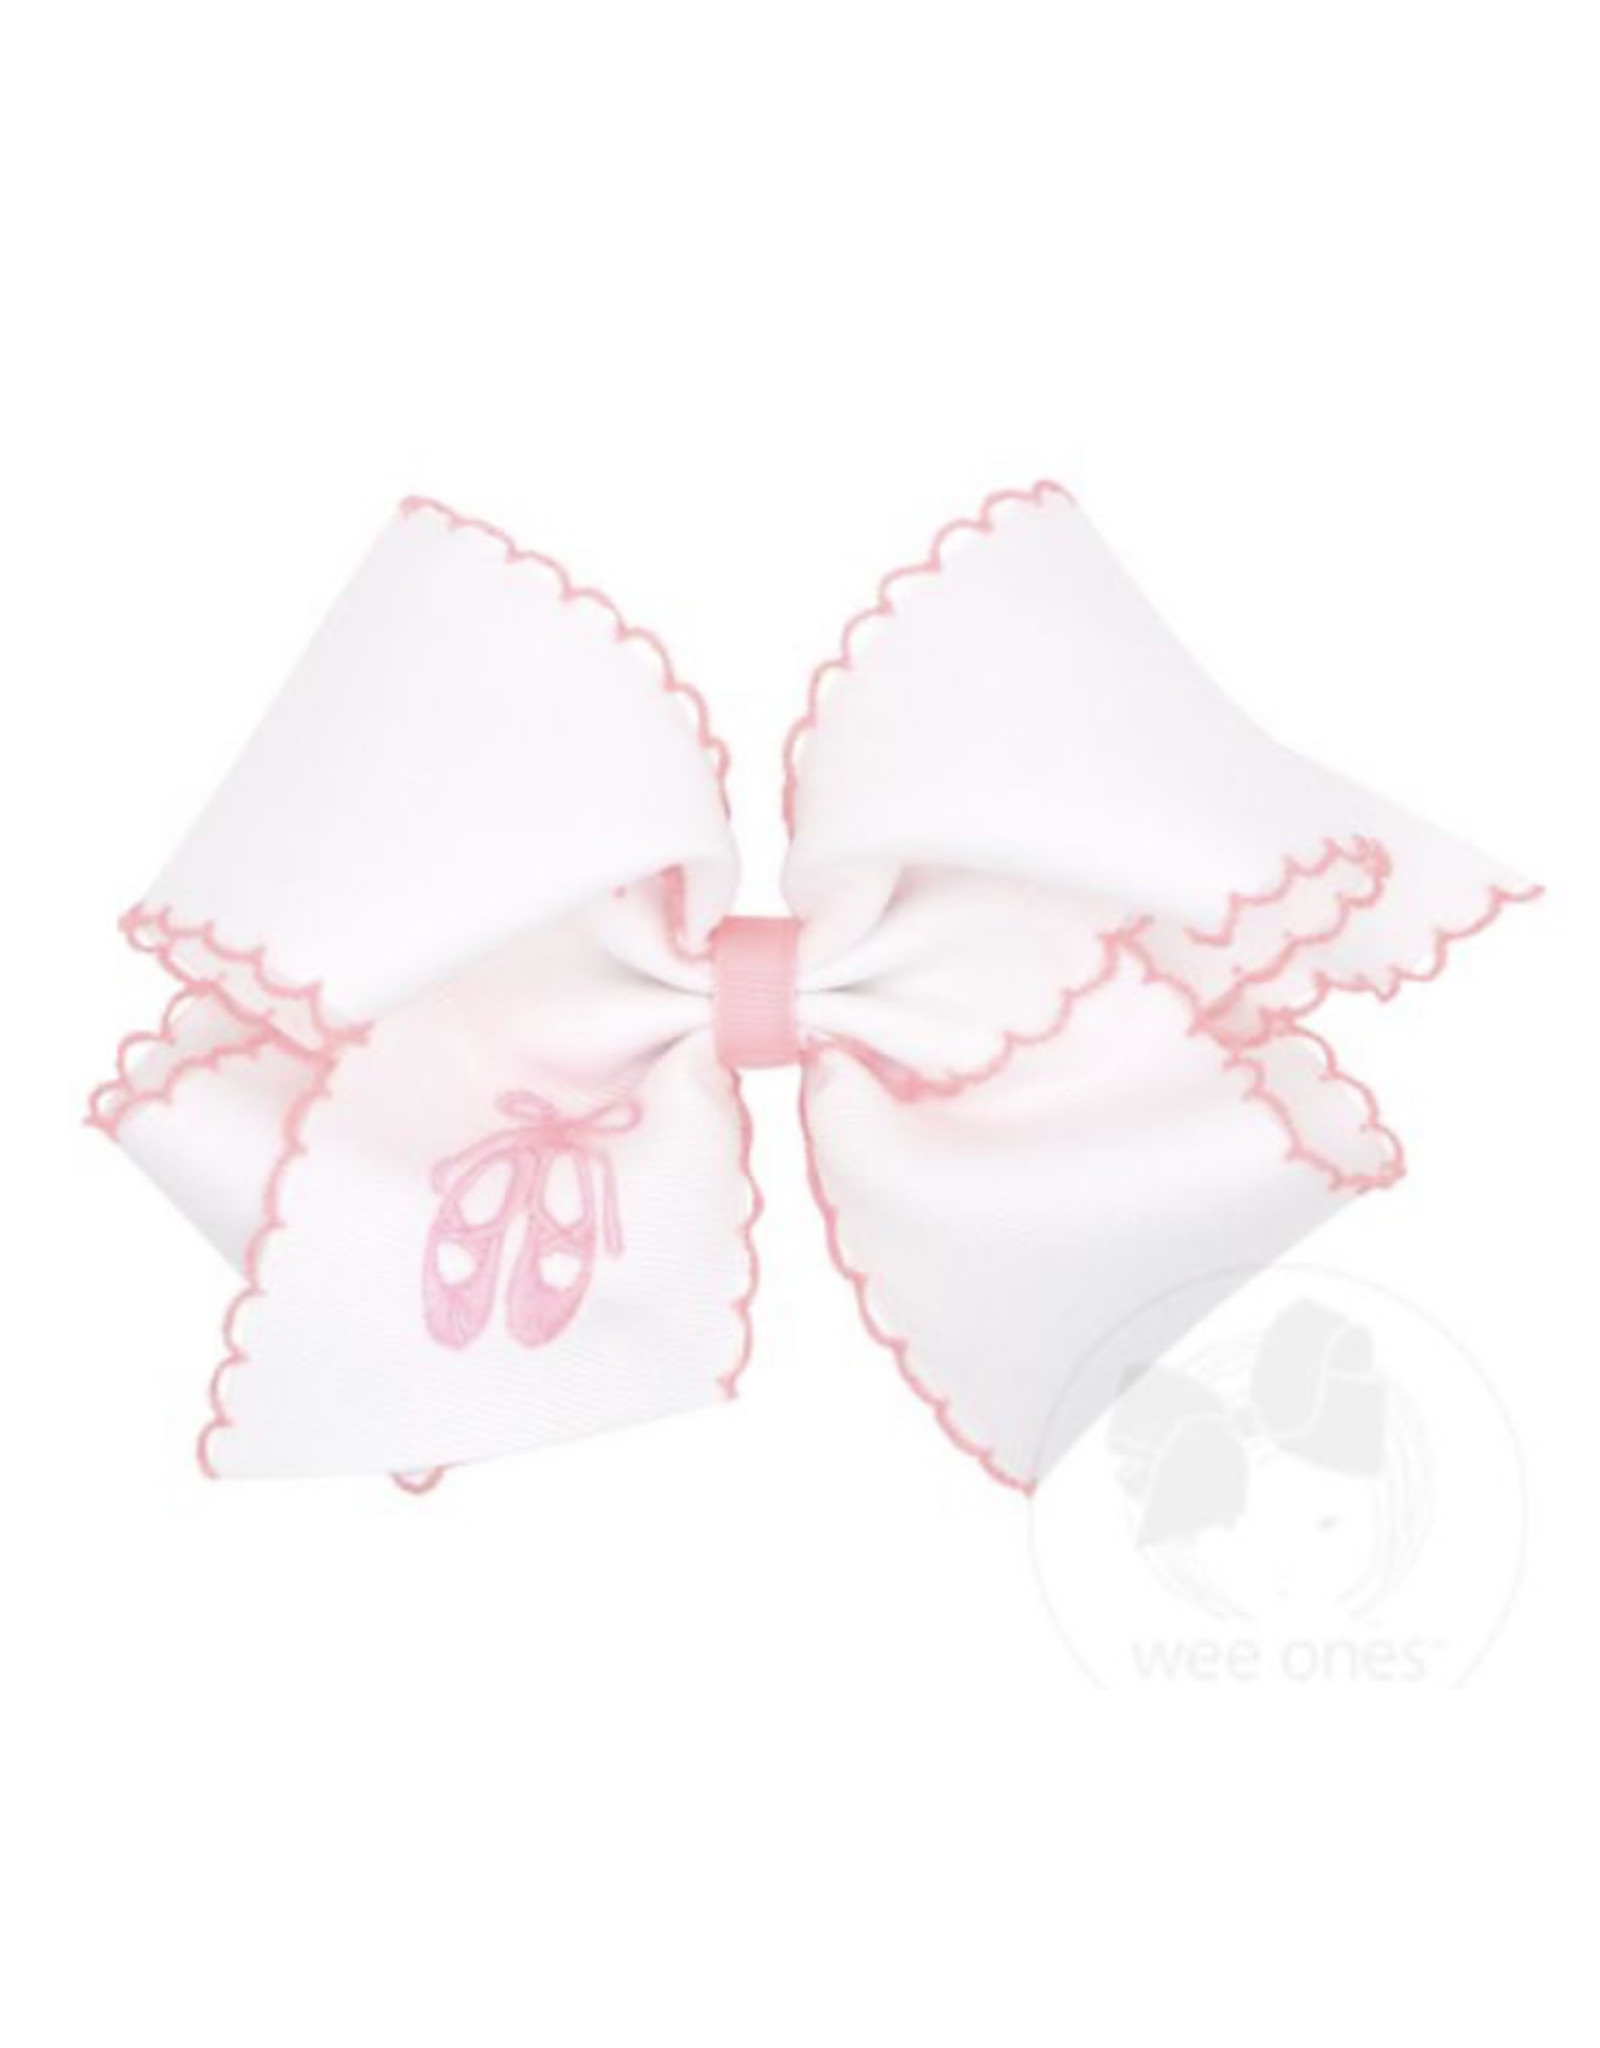 Wee Ones- King White Moonstitch Pink Ballet Bow